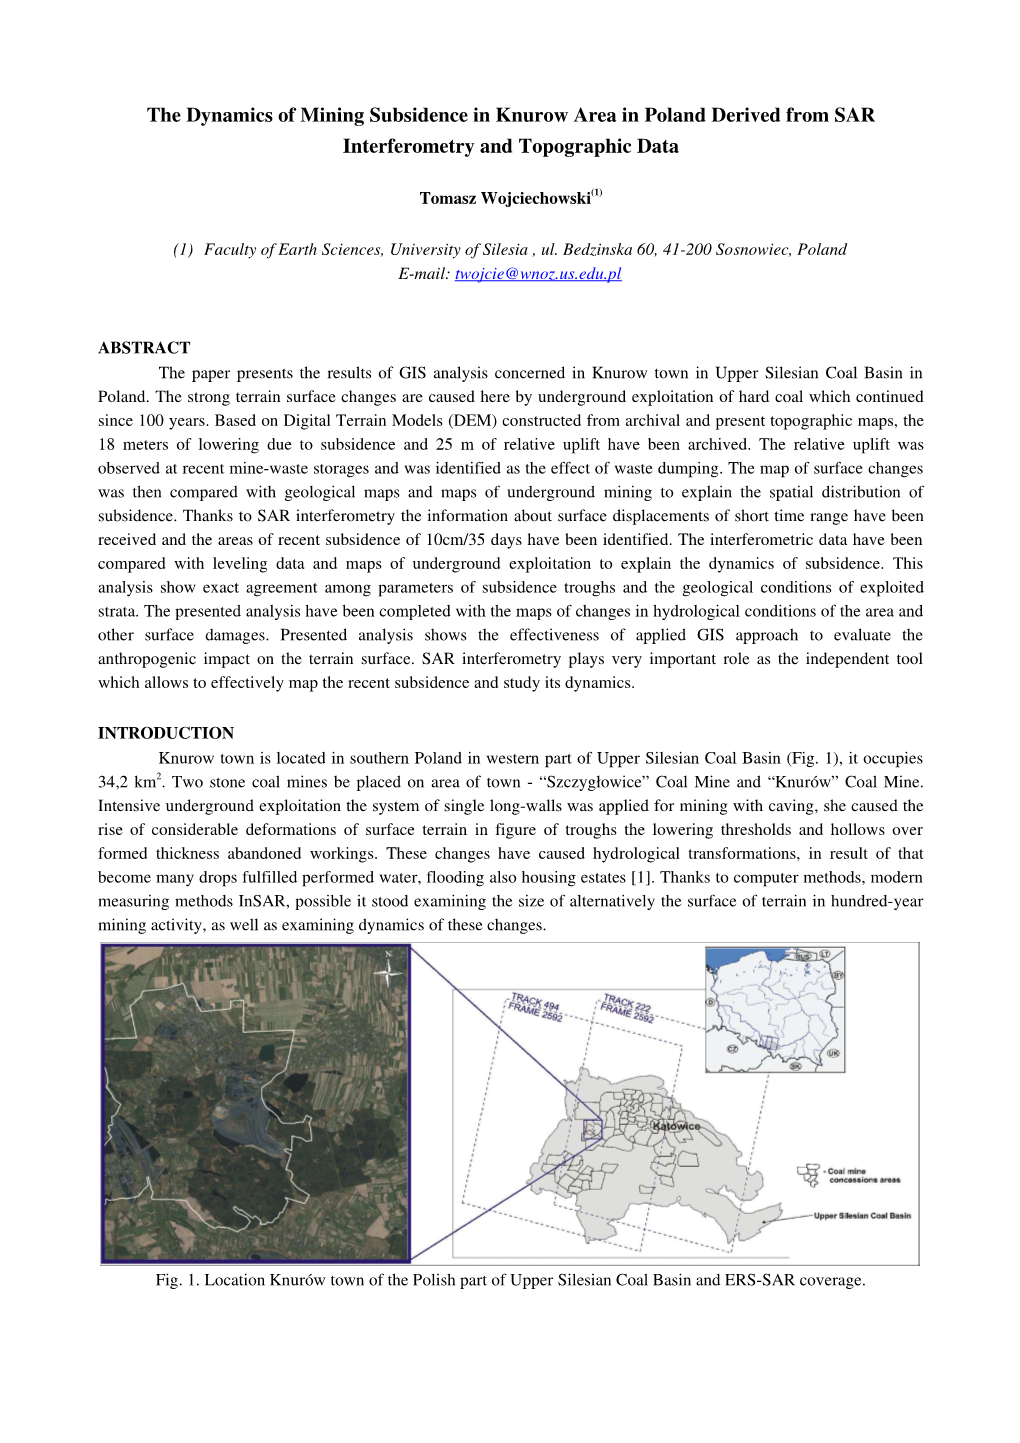 The Dynamics of Mining Subsidence in Knurow Area in Poland Derived from SAR Interferometry and Topographic Data